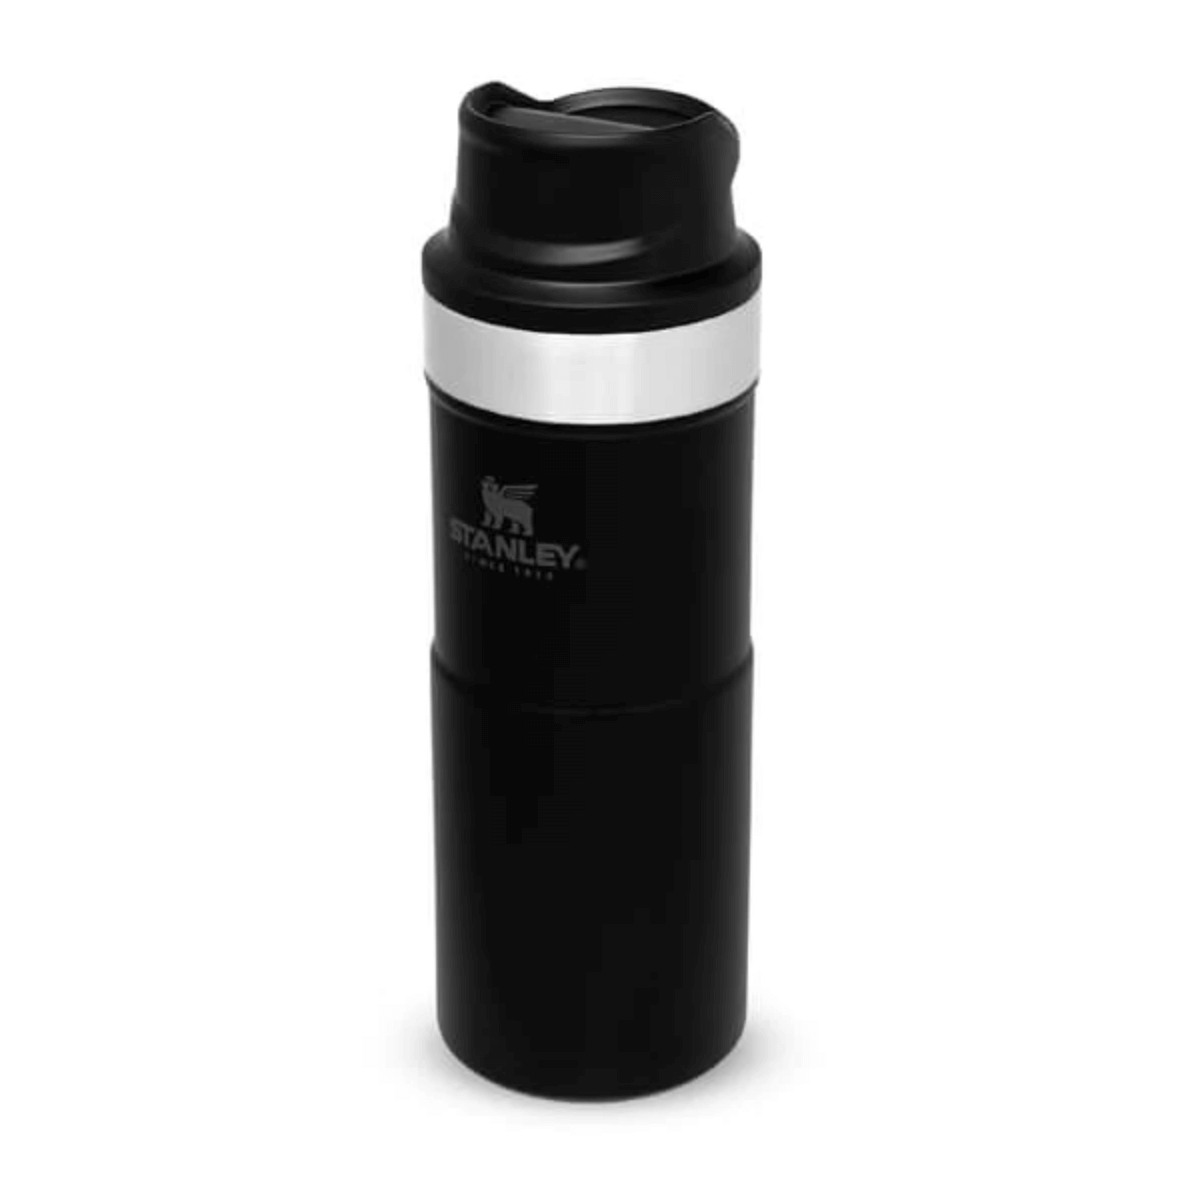 https://www.ccwclothing.com/uploads/images/products/verylarge/ccw-clothing-stanley-stanley-trigger-action-mug-1685524920stanley-triggeractionmug-black-ccw.png